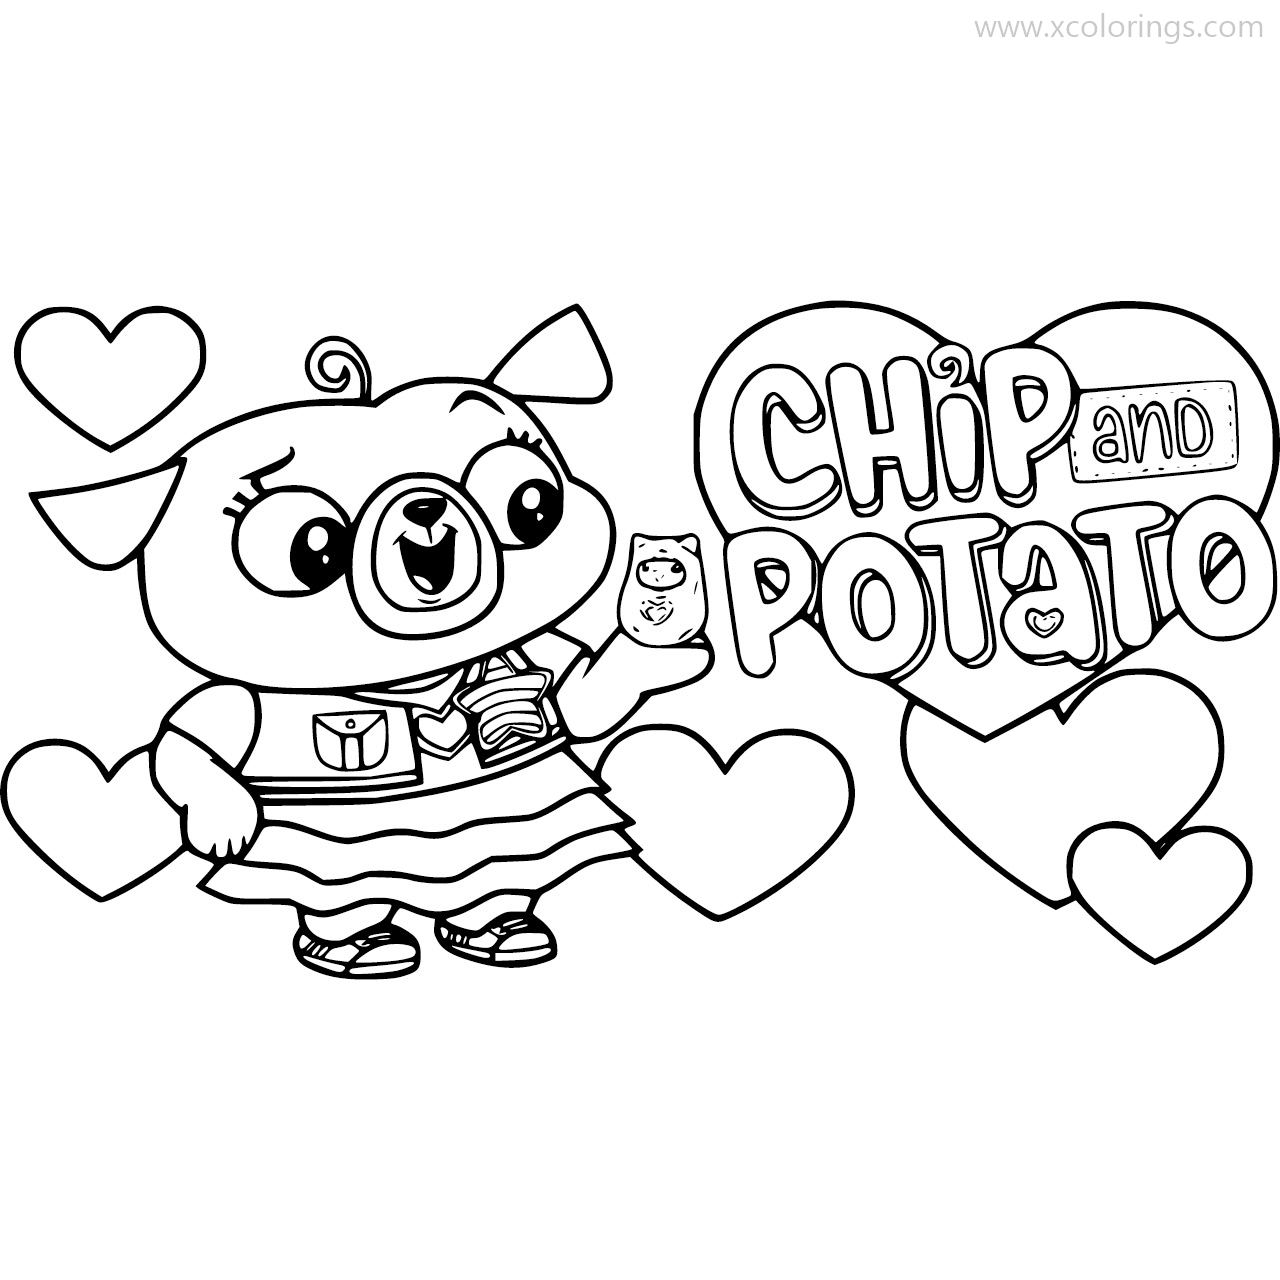 Free Chip and Potato Coloring Pages Pug with Logo printable